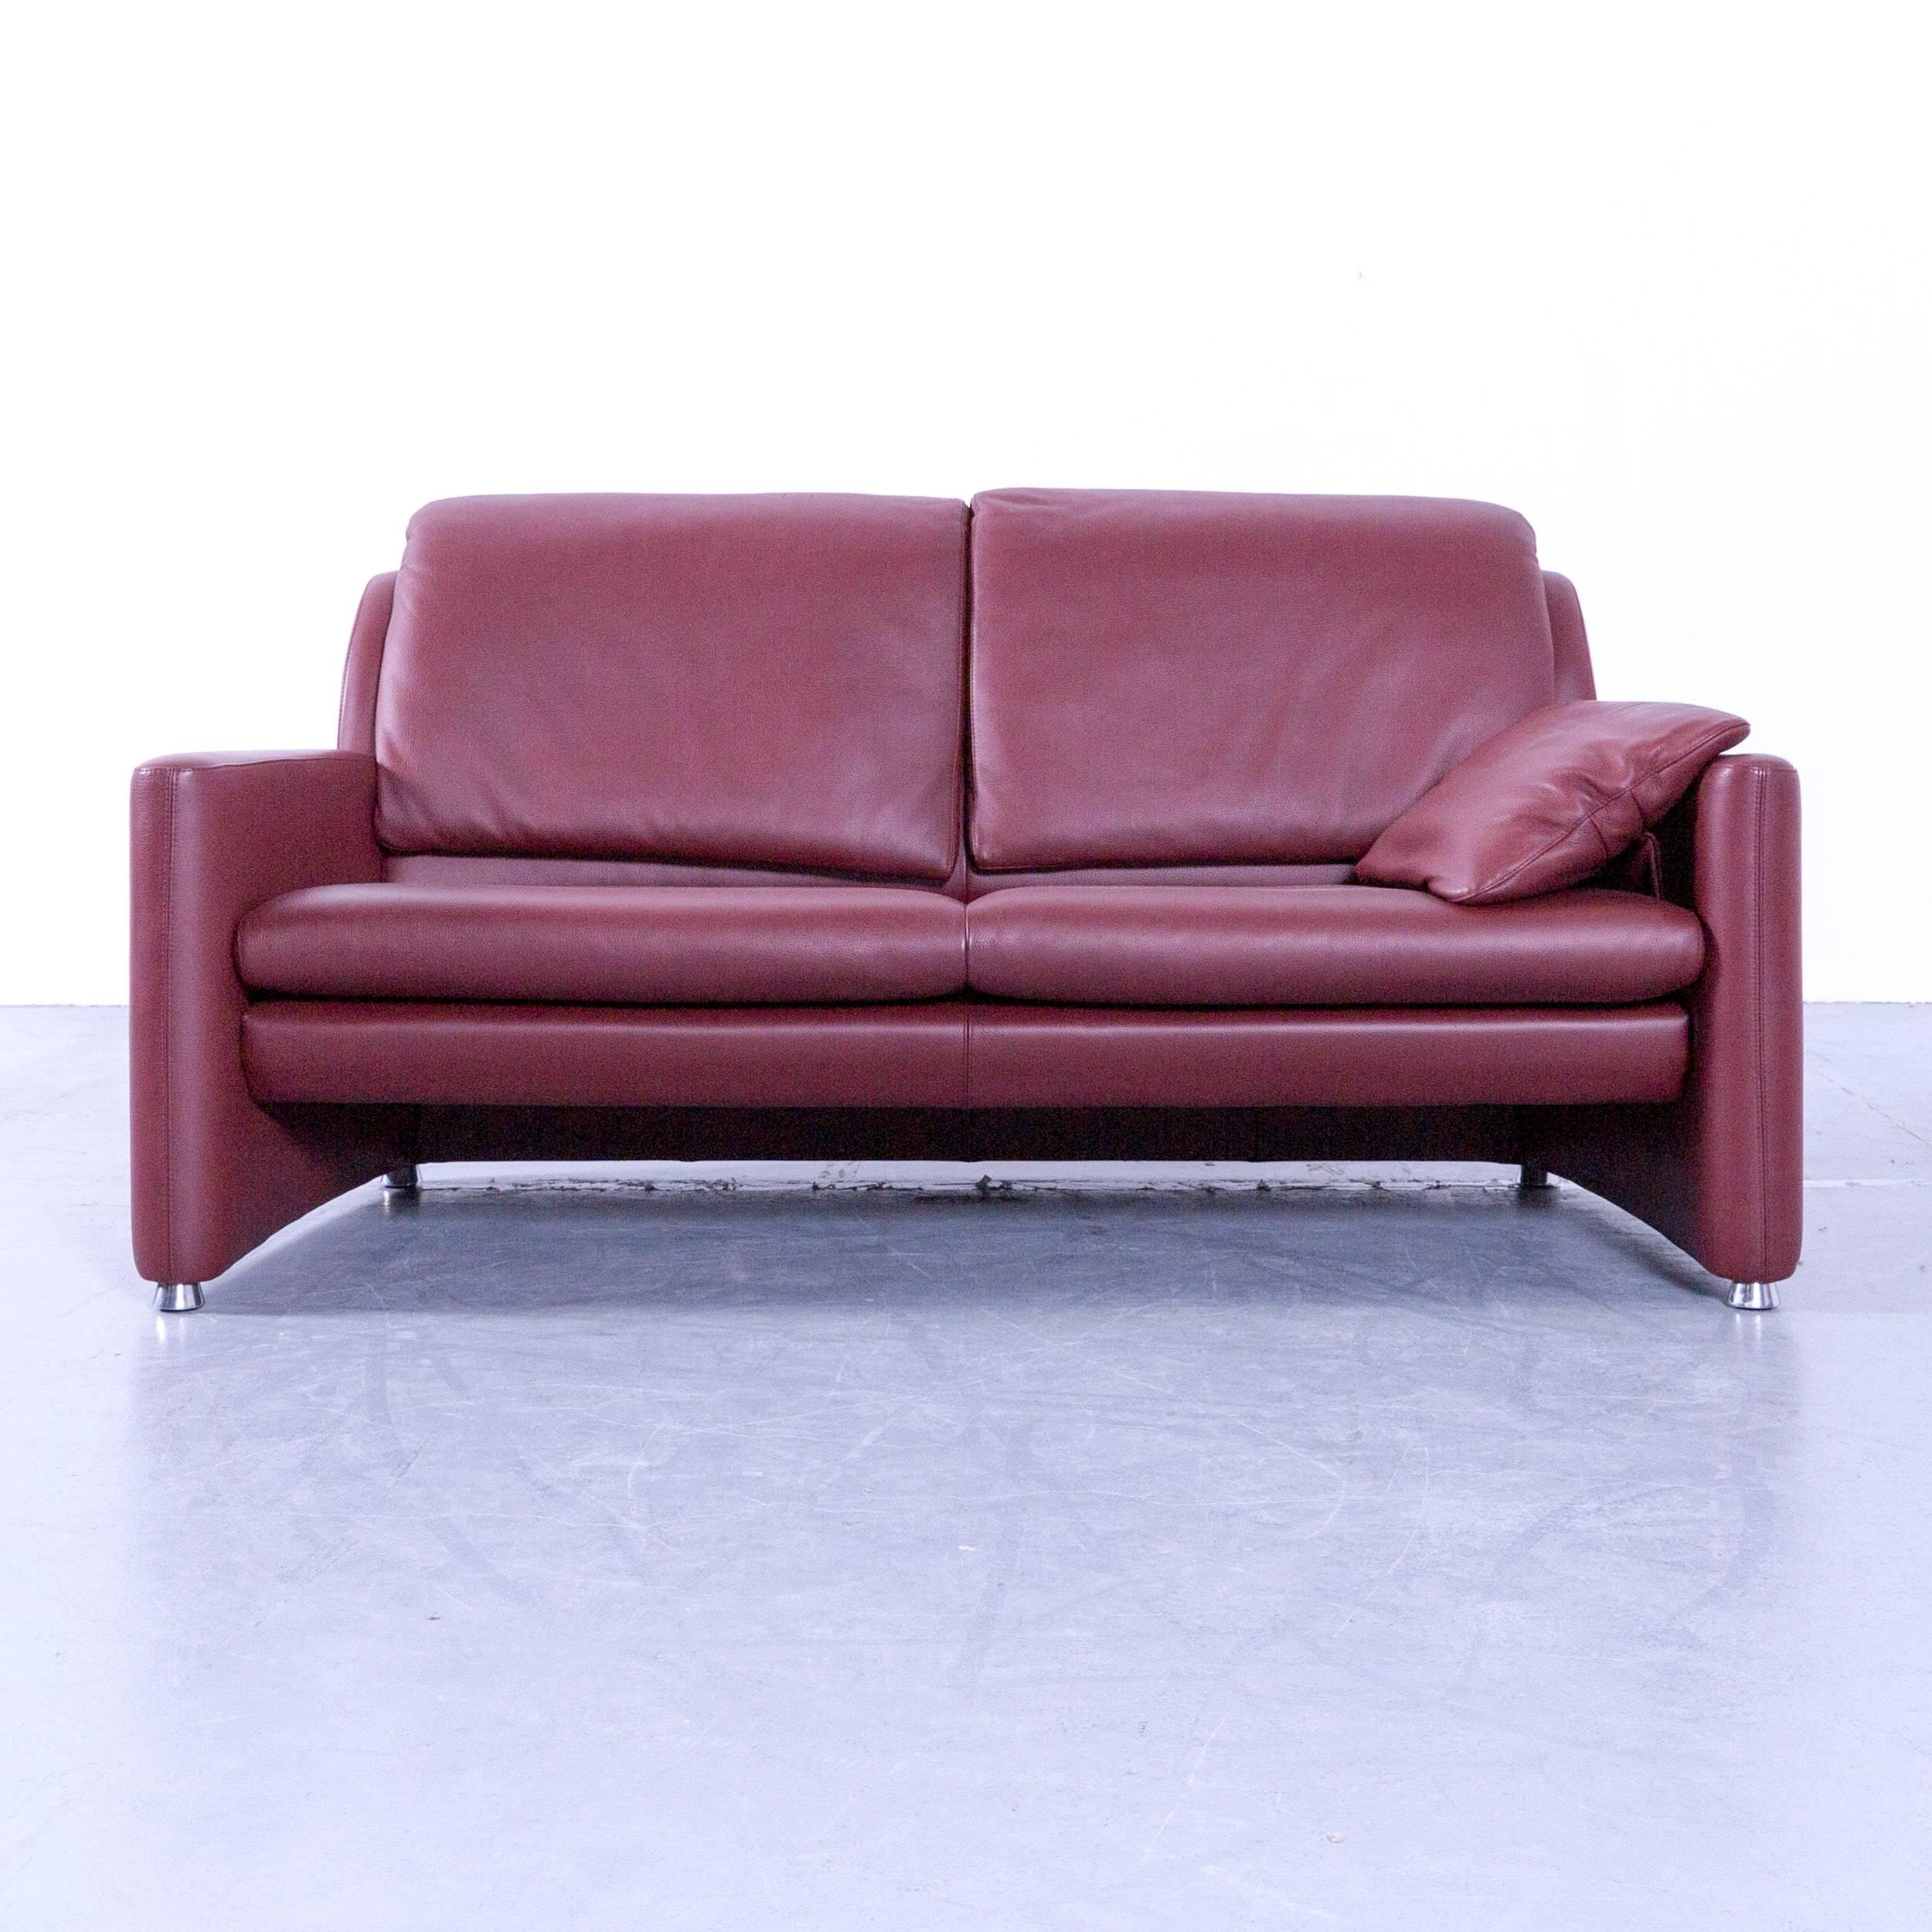 Red colored original Leolux Fidamigo designer leather sofa in a minimalistic and modern design, with convenient functions, made for pure comfort and flexibility.